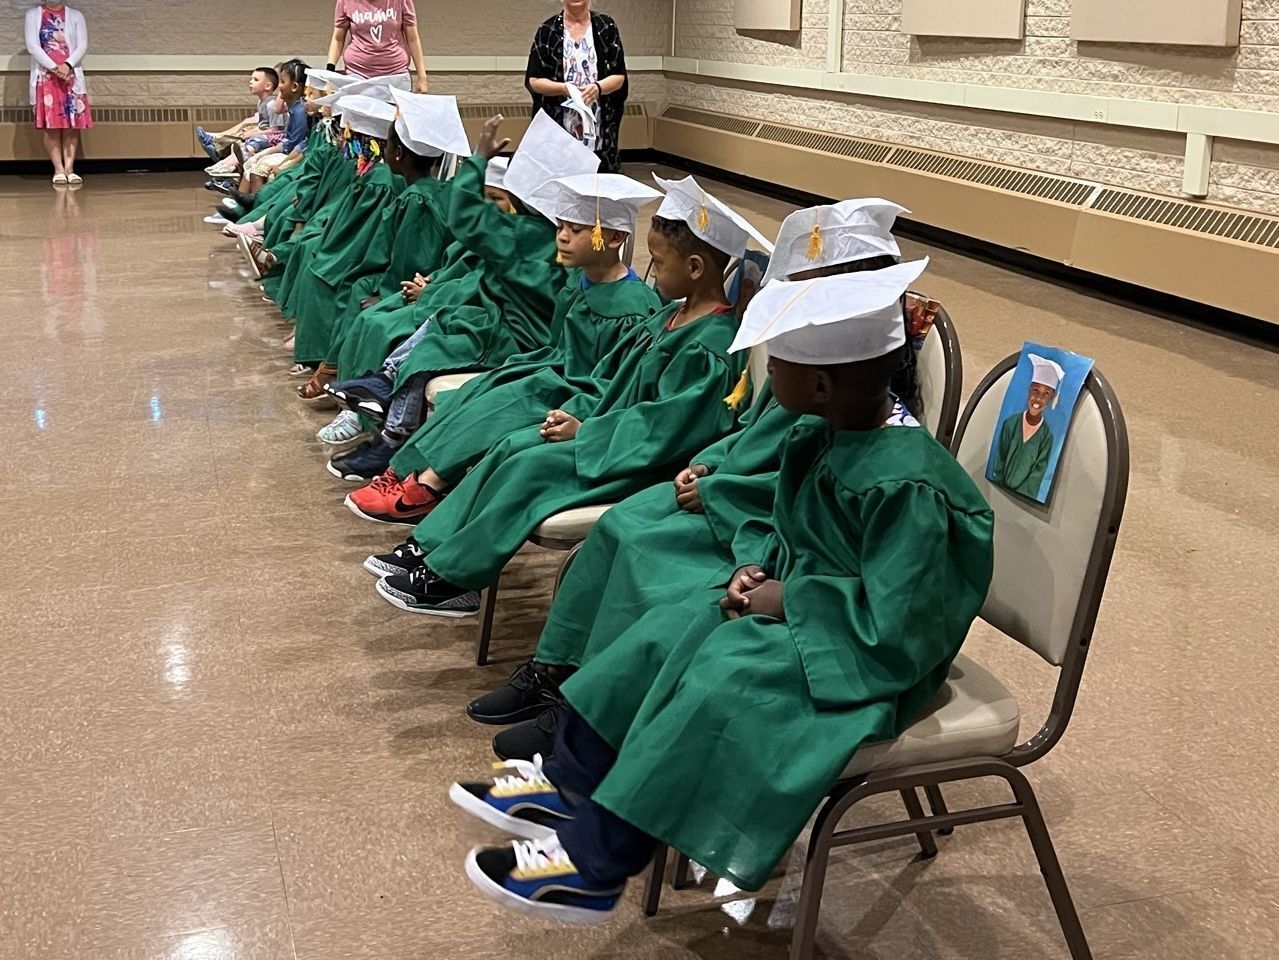 Students sit in while caps and green gowns in a row of chairs for their preschool graduation.